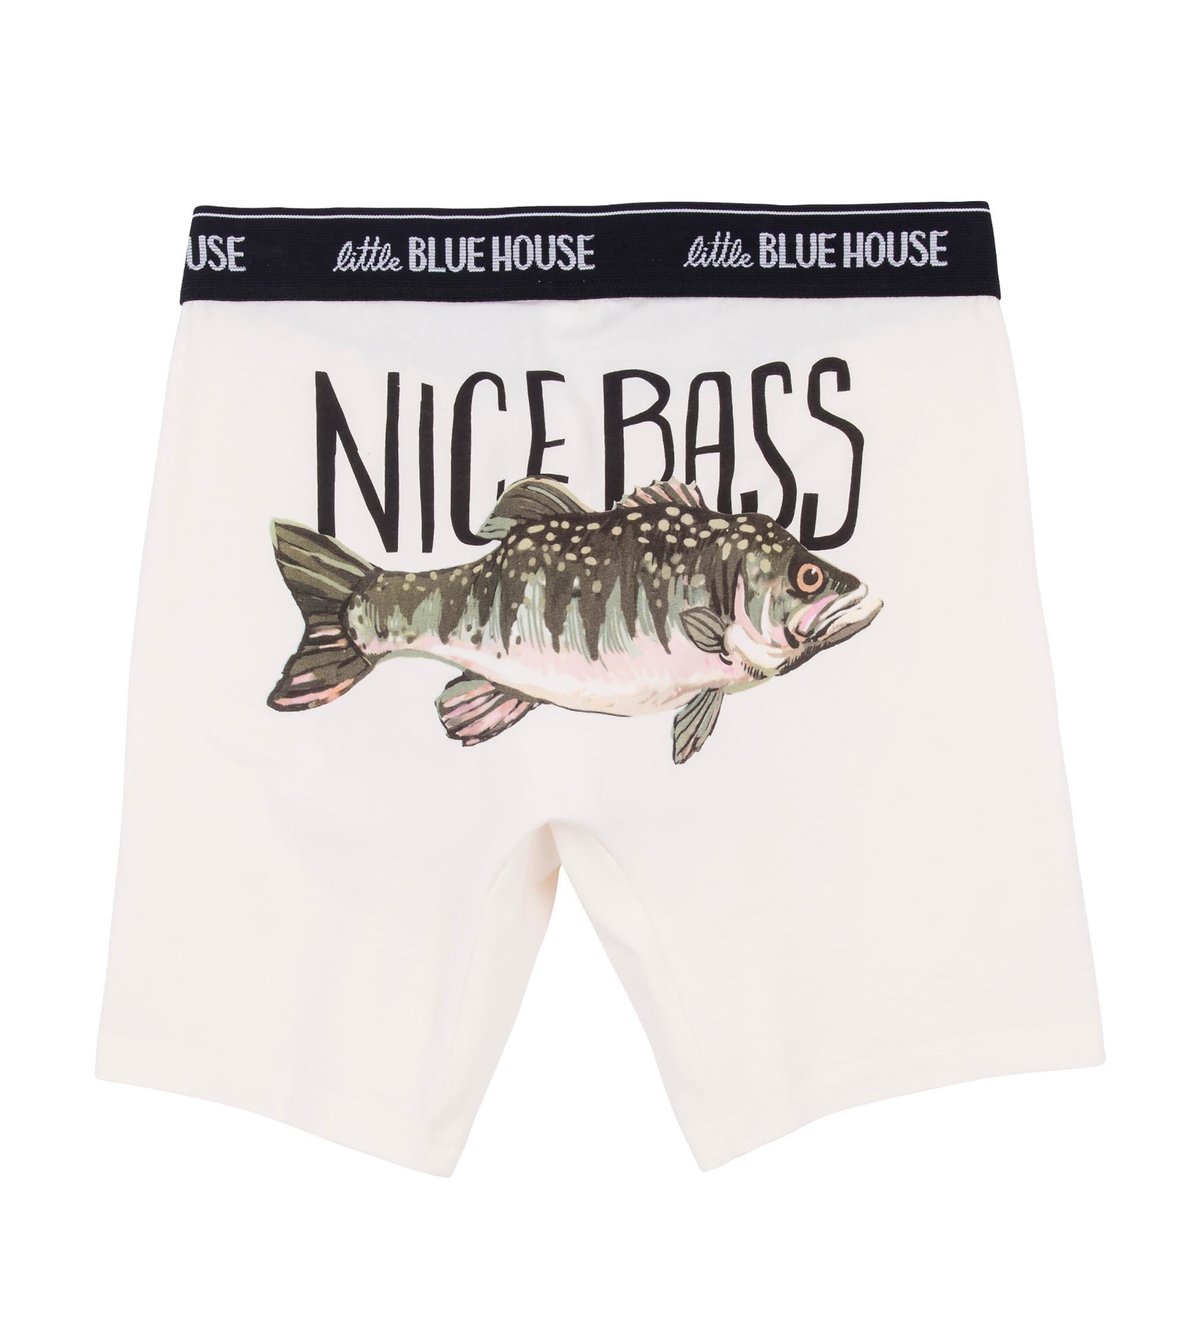 View larger image of Nice Bass Men's Boxer Briefs